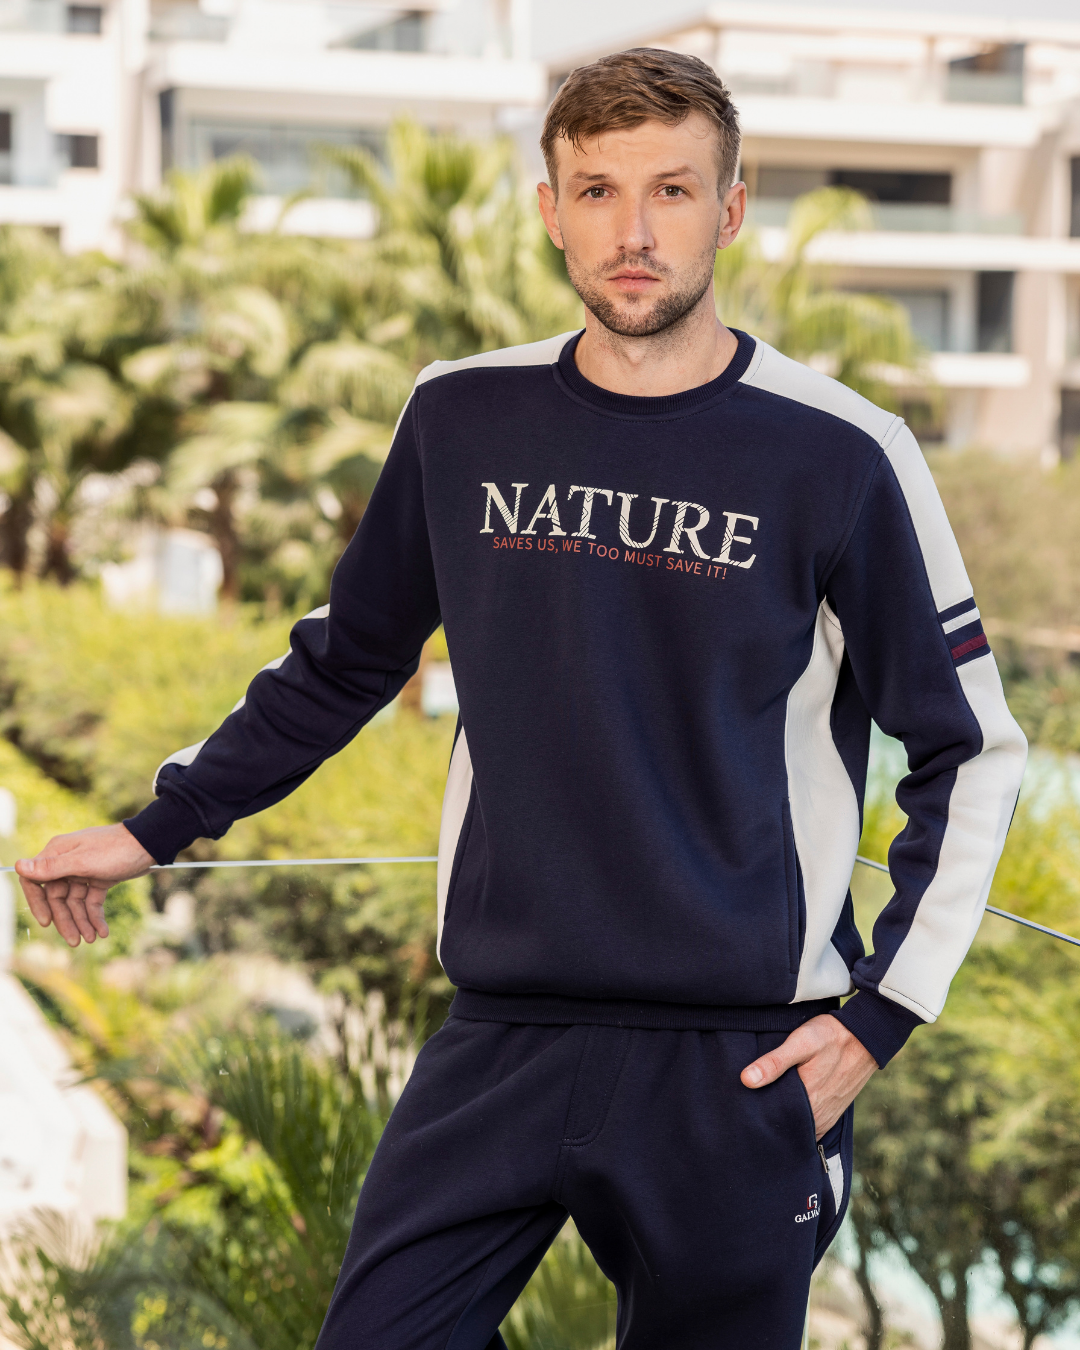 NATURE Men's pajamas with print on the chest